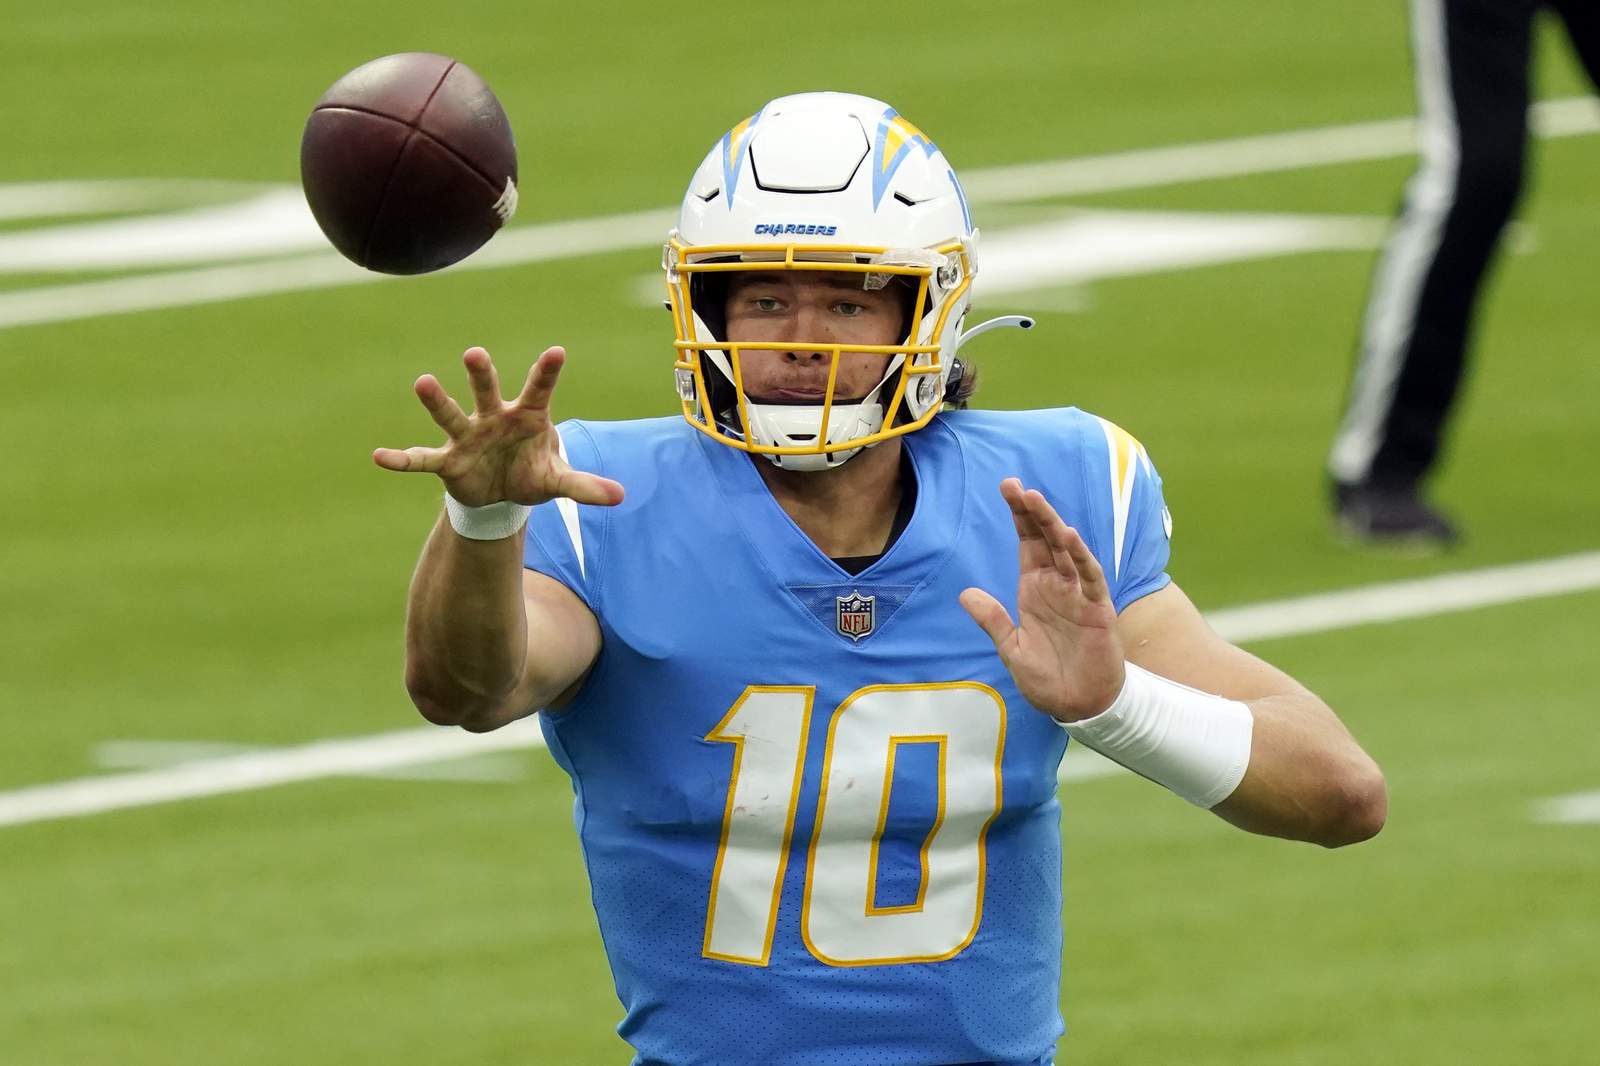 The Latest: Chargers up 39-29 on Jaguars late